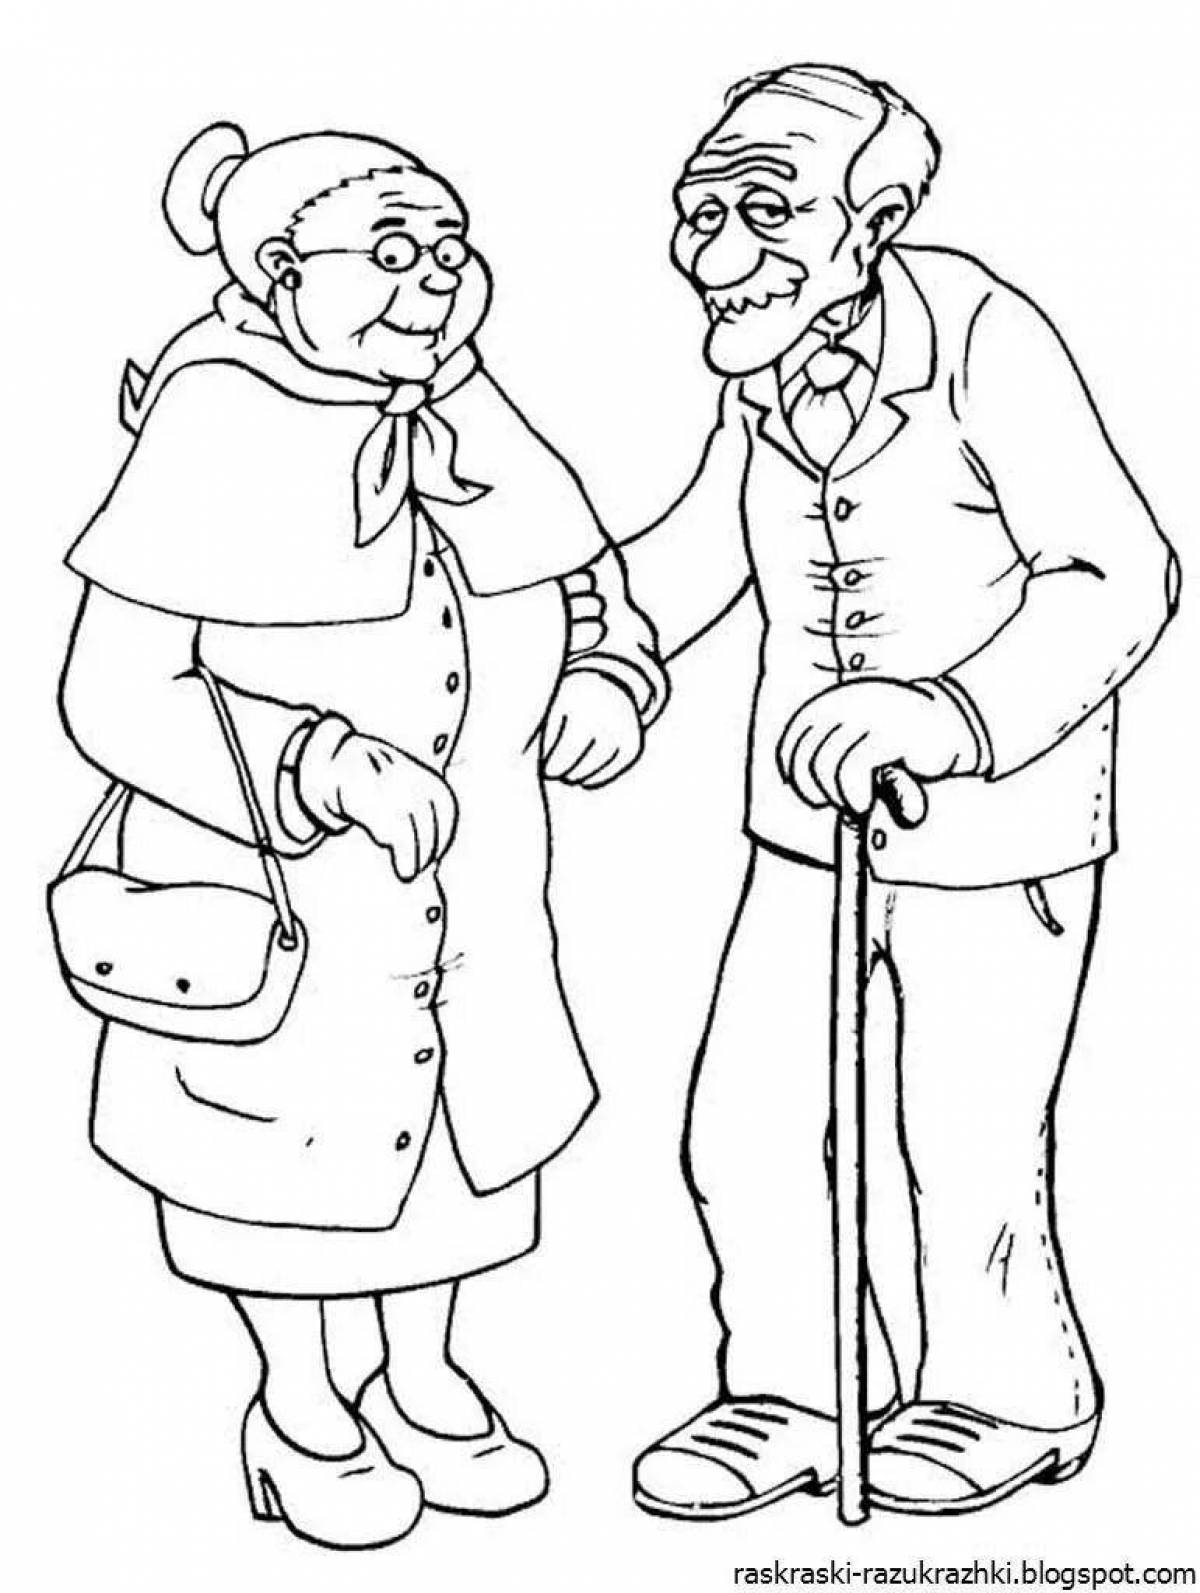 Caring grandparents coloring pages for kids